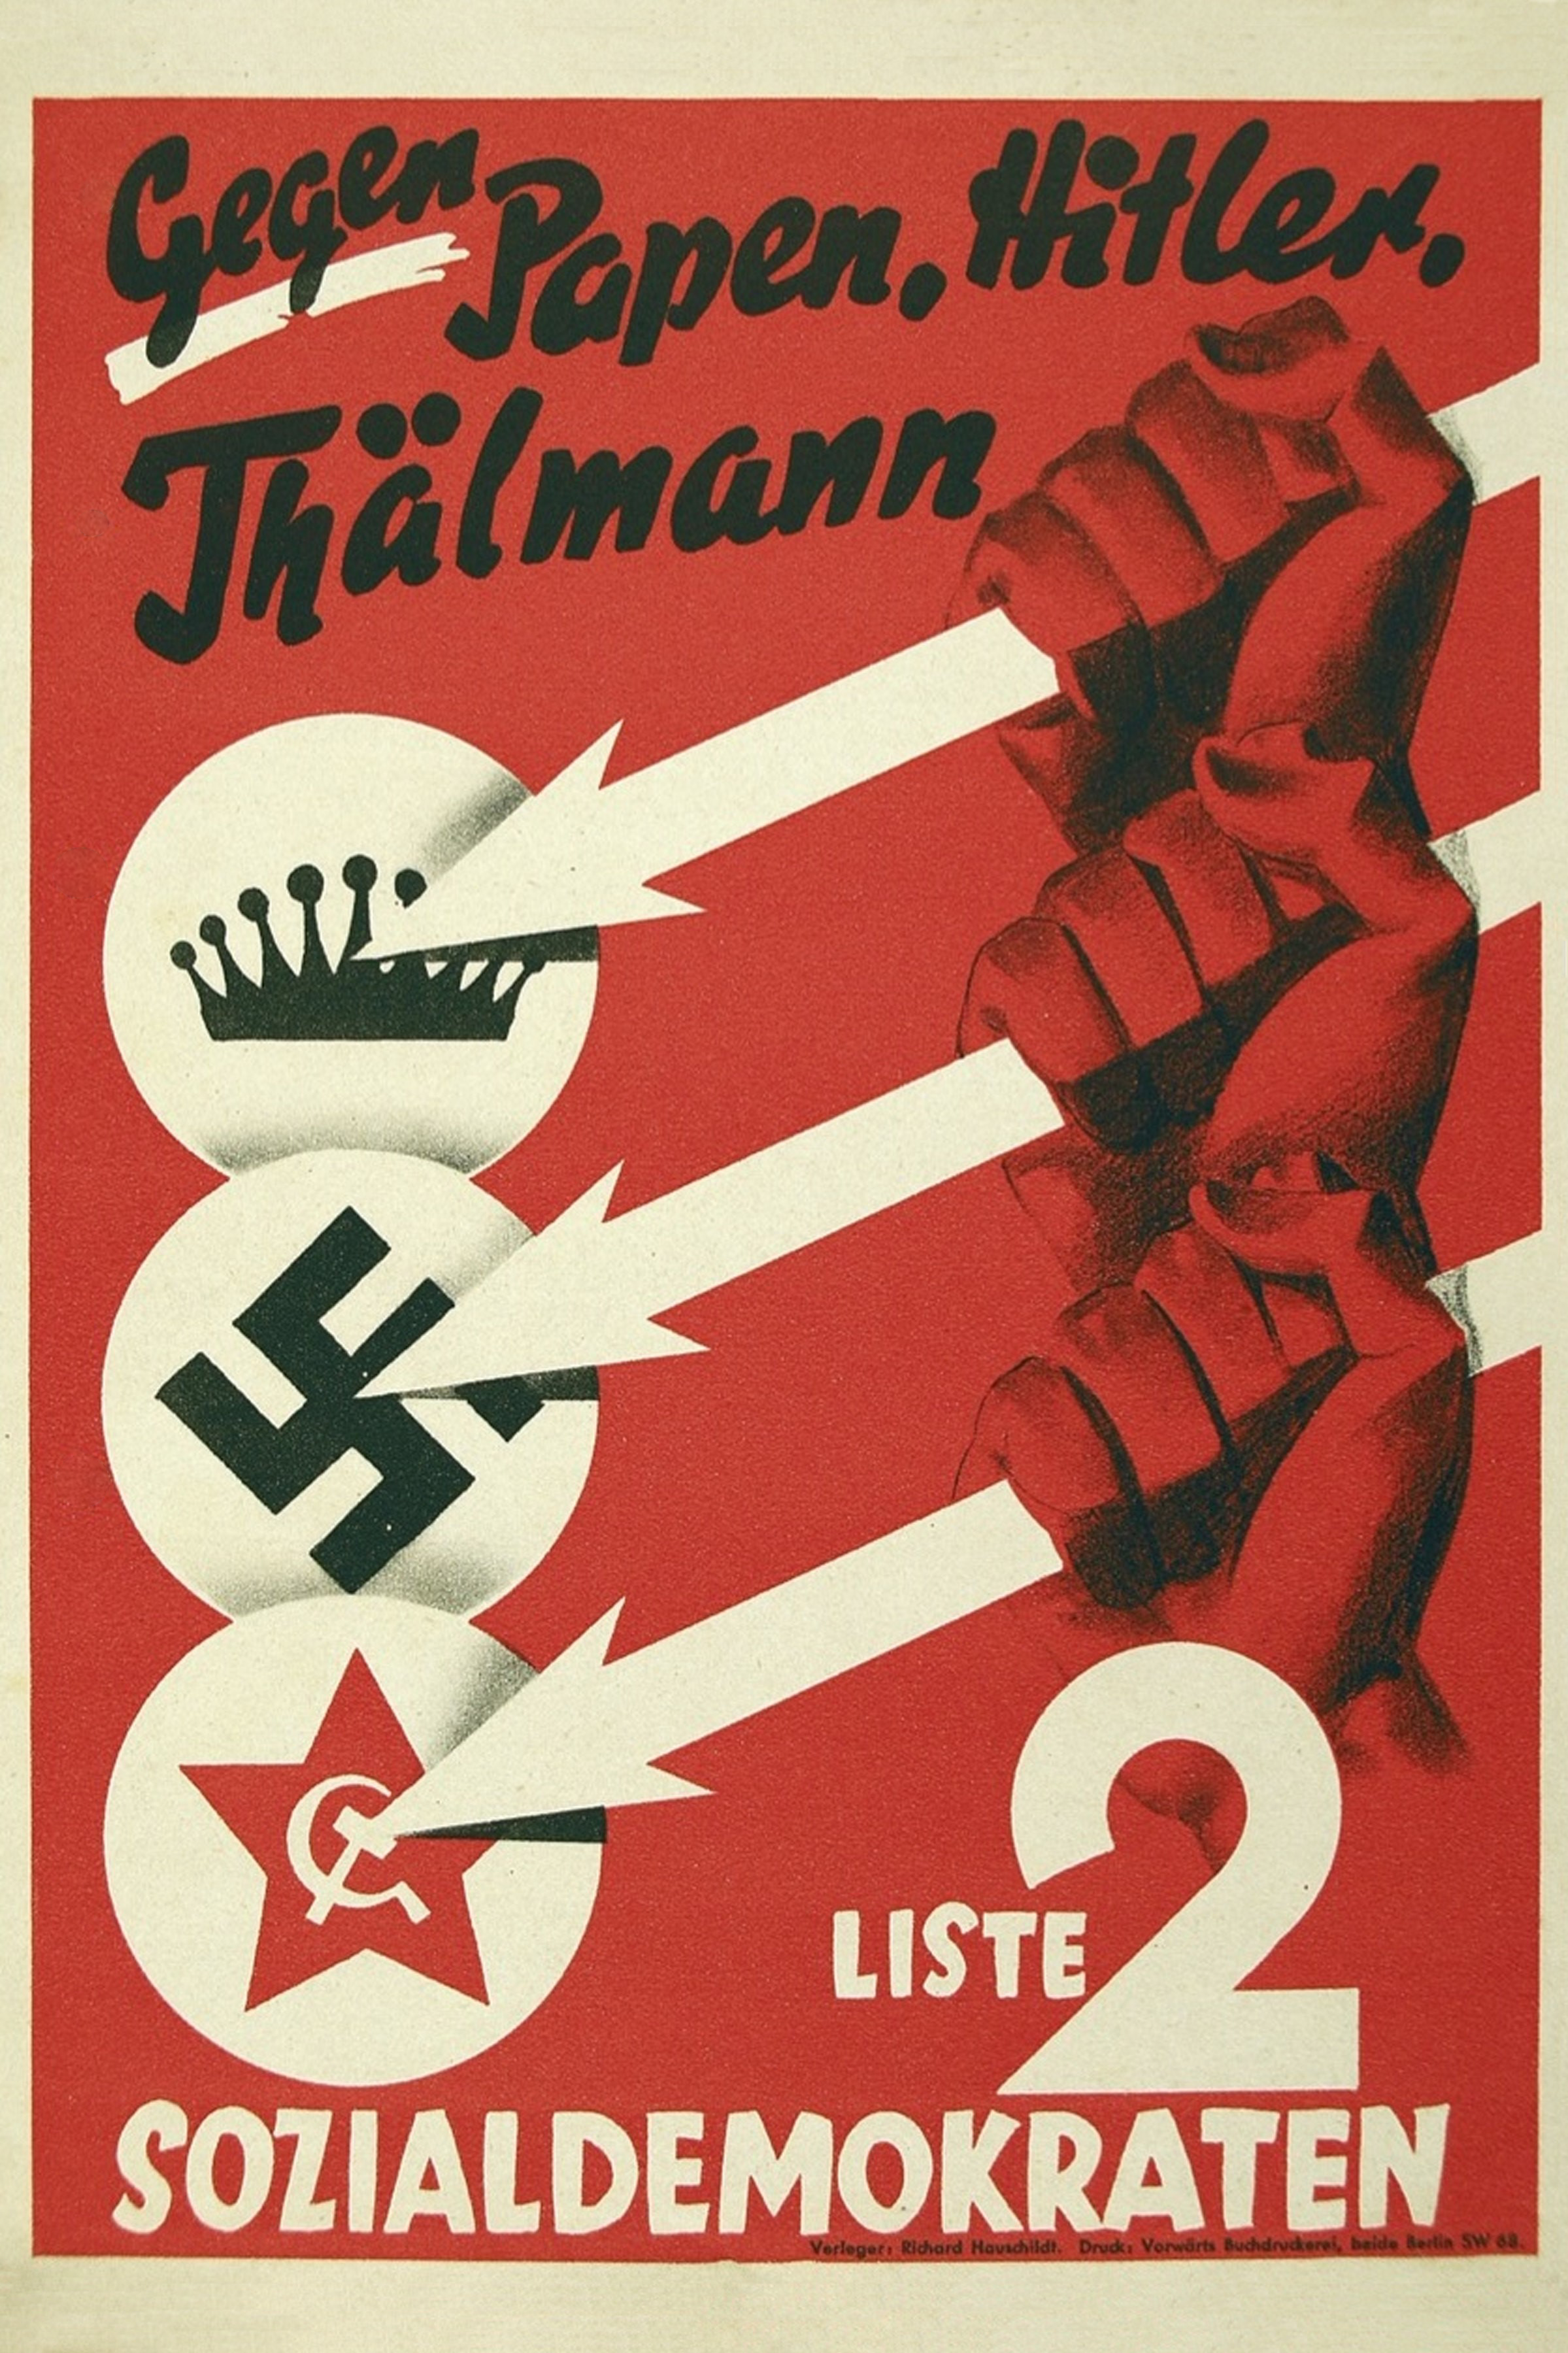 Three_Arrows_election_poster_of_the_Social_Democratic_Party_of_Germany,_1932_-_Gegen_Papen,_Hitler,_Thälmann